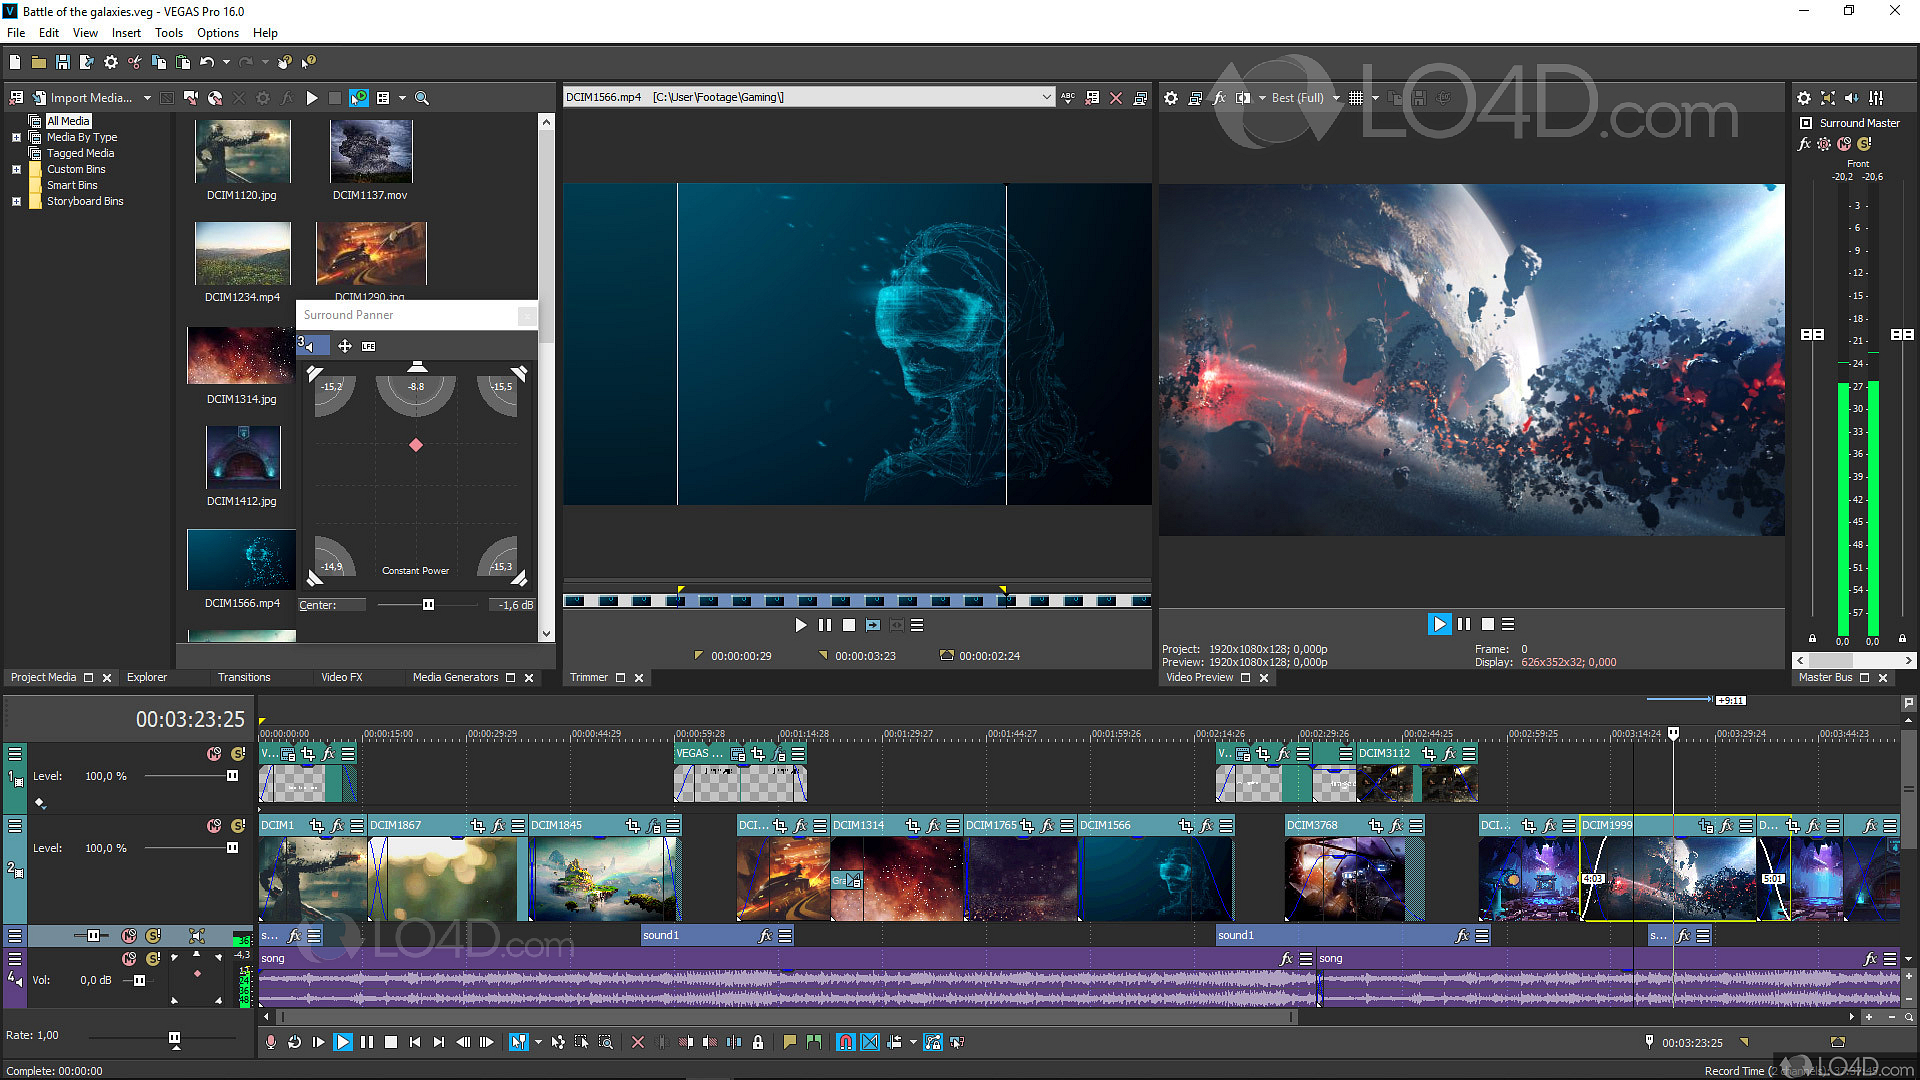 sony vegas pro video editing software free download